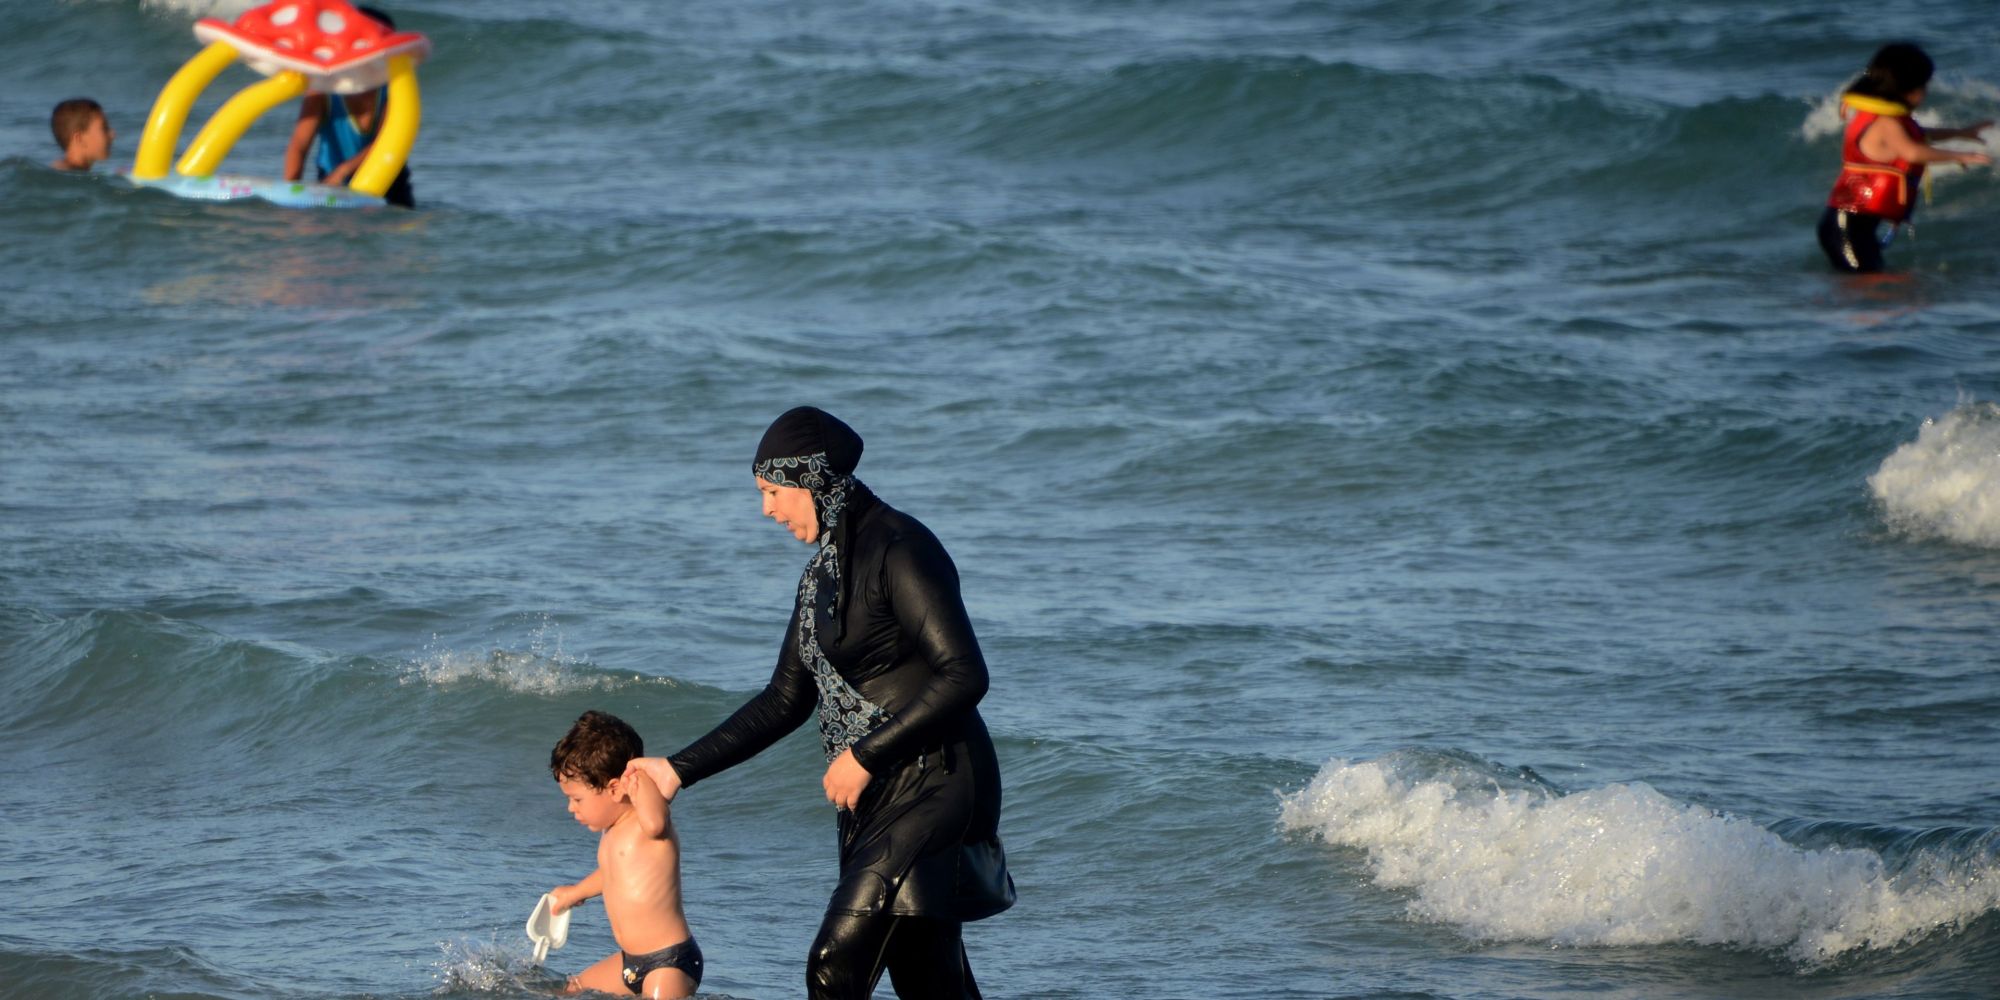 Banning The Burkini In Italy Would Be Unconstitutional And ...